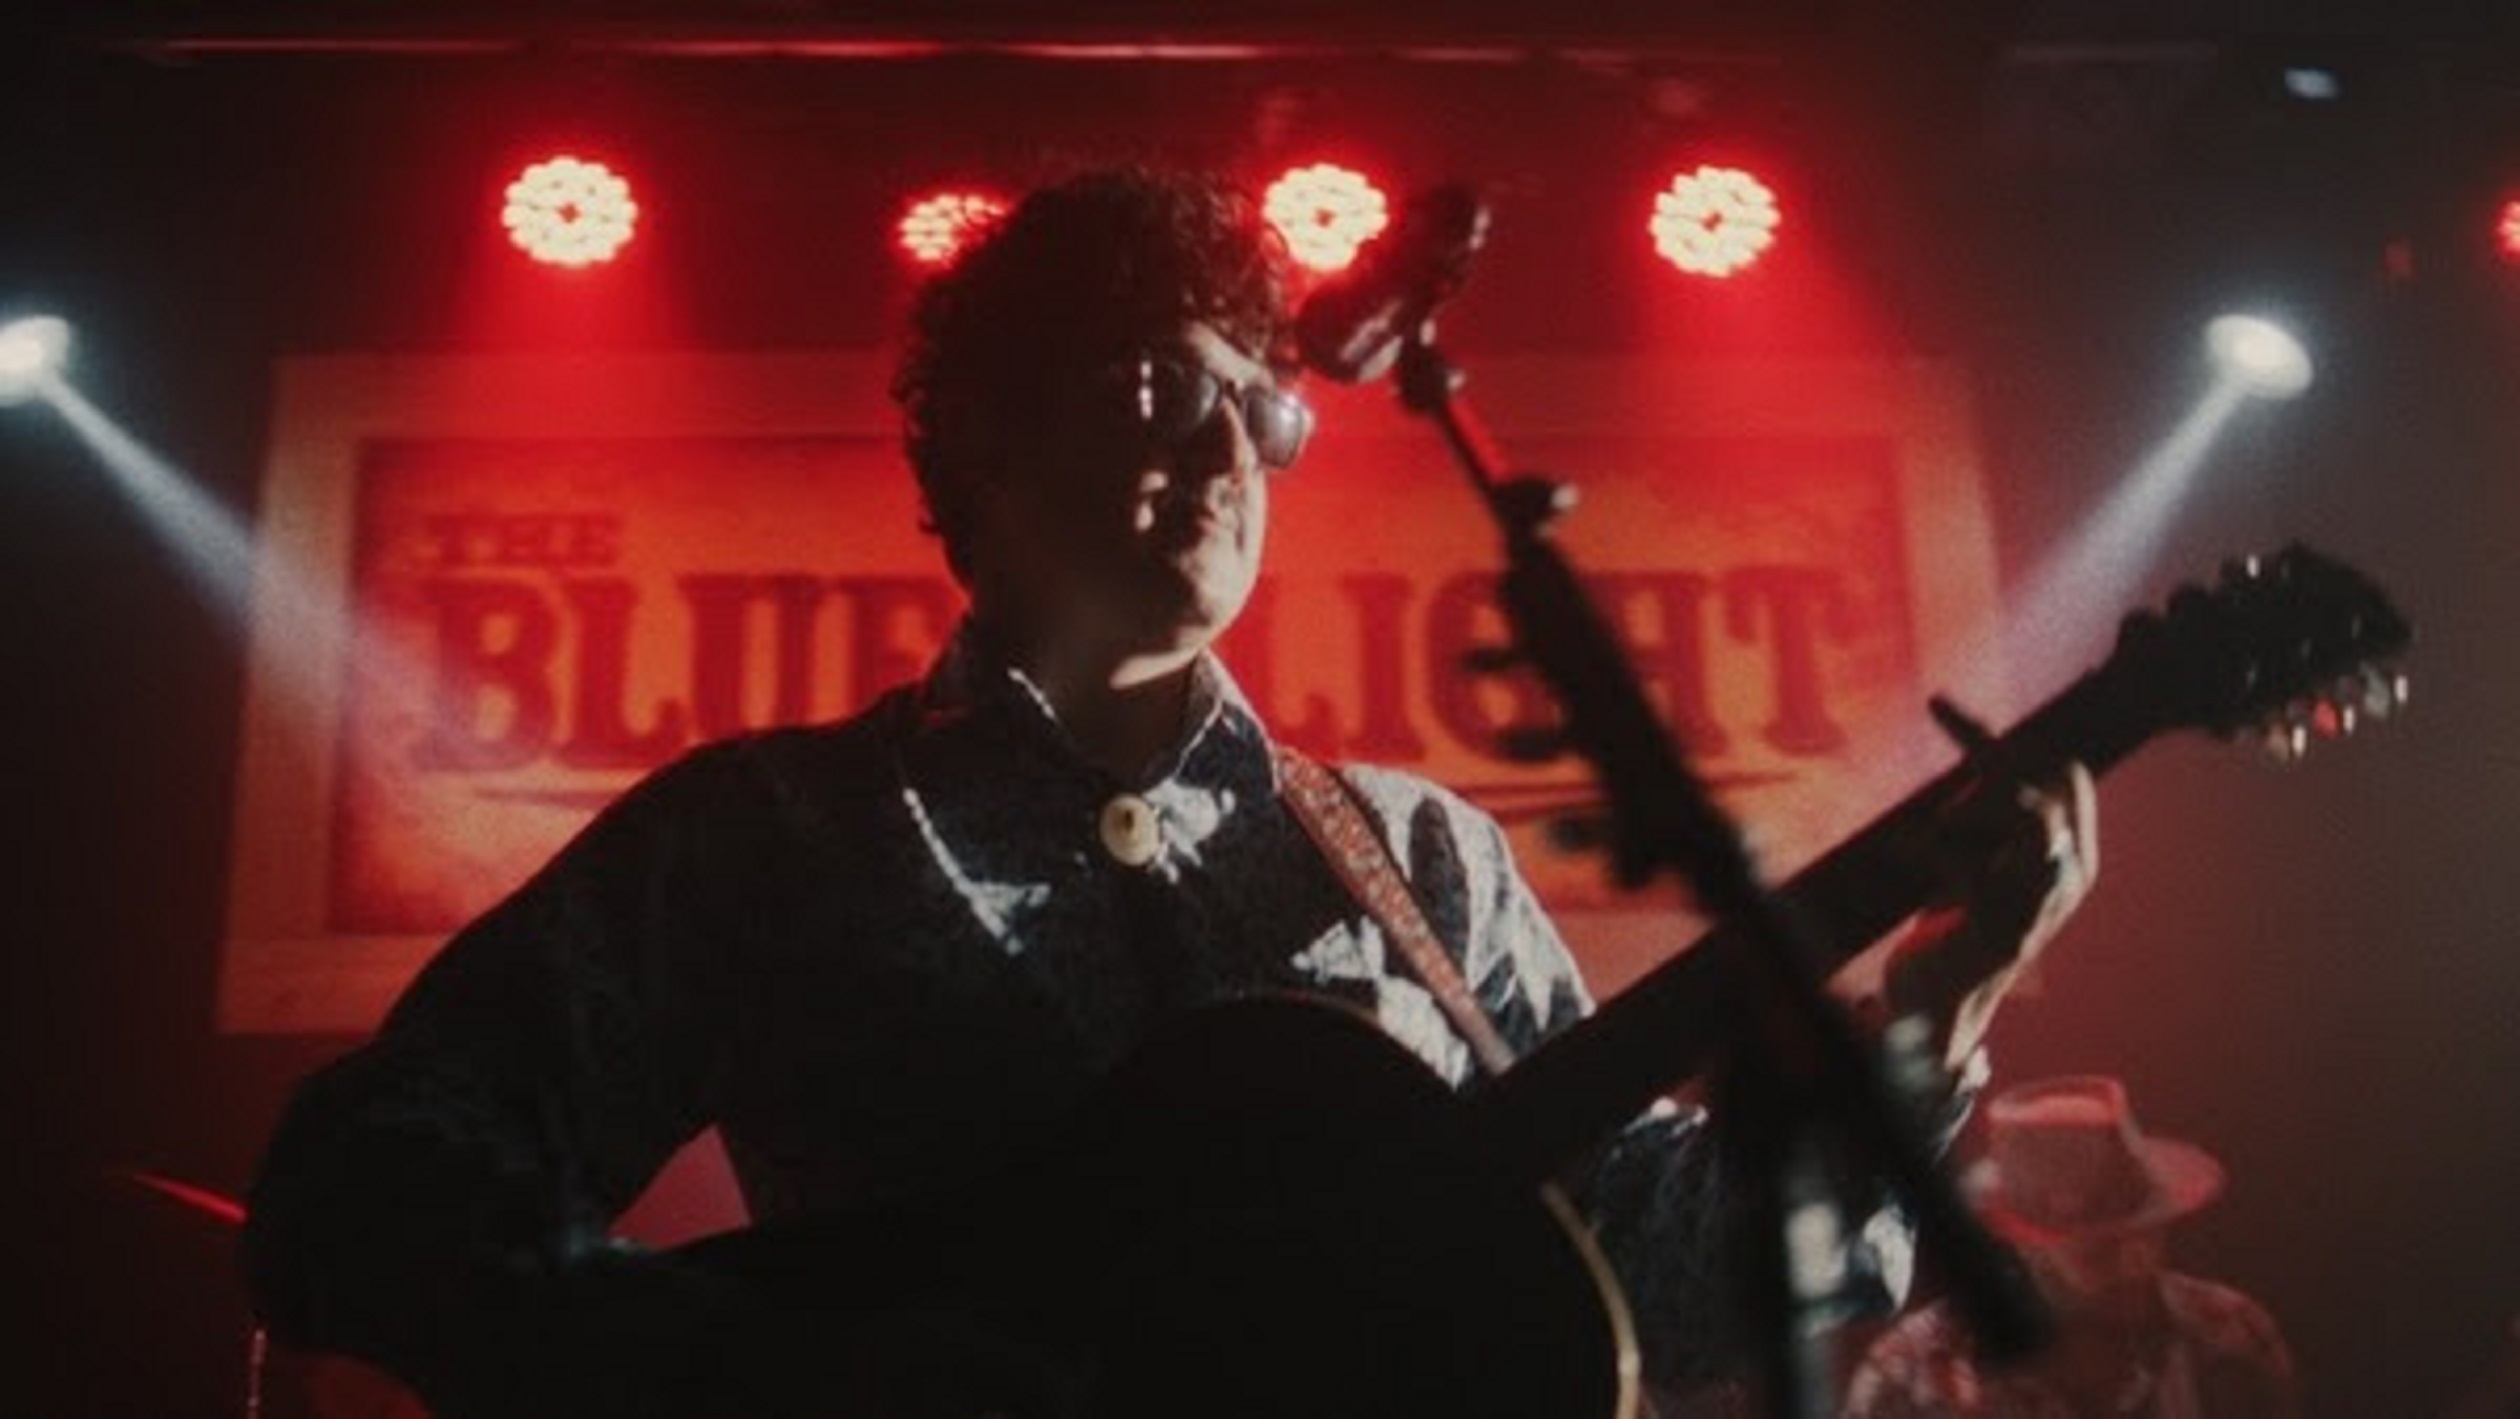 Flatland Cavalry's "The Provider" music video debuts today